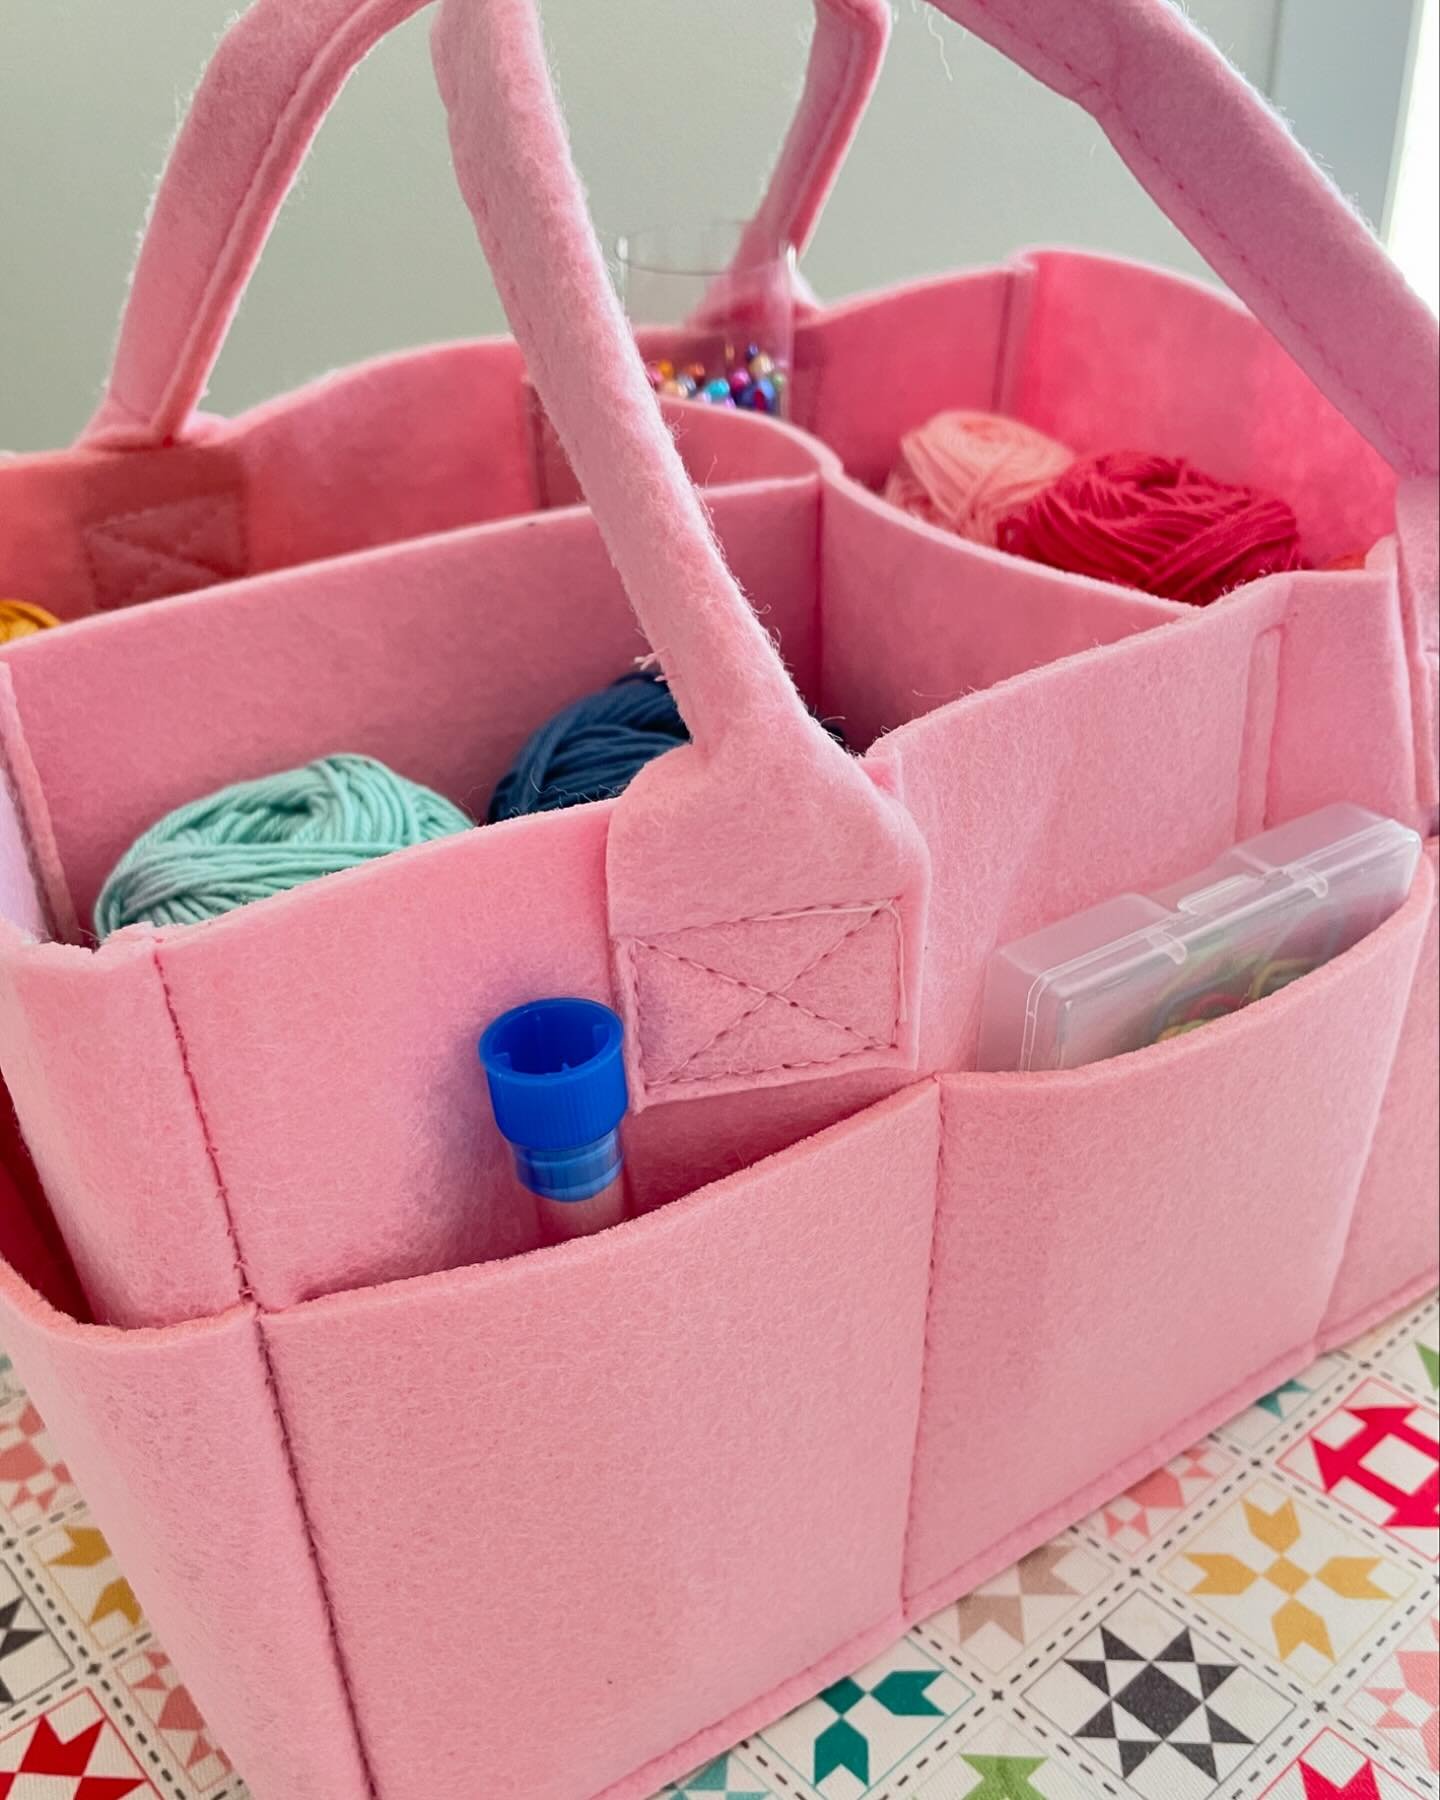 I&rsquo;m ready for my next crochet project! 

Loving this super cute pink collapsible caddy I got to hold my super fun @beelori1 chunky thread, and my other crochet supplies. The caddy is the perfect size! 

As soon as my hand/wrist is ready after c